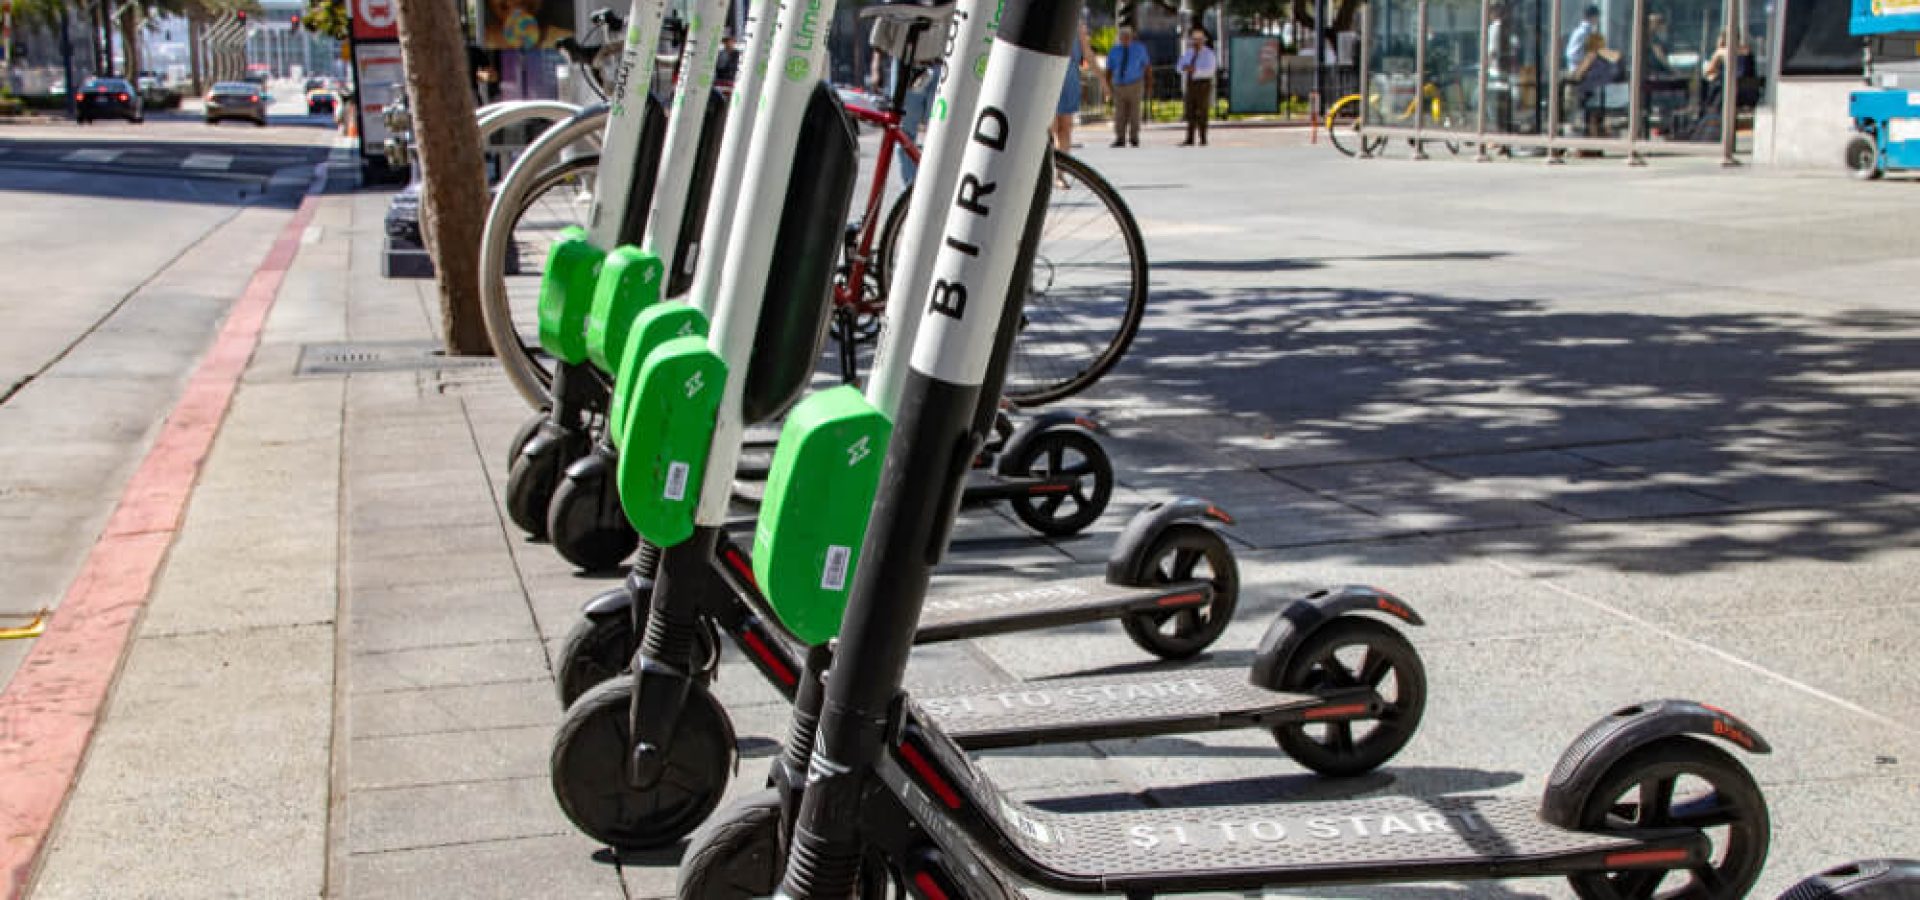 Bird Electric Ride Sharing scooters lined up and ready to rent